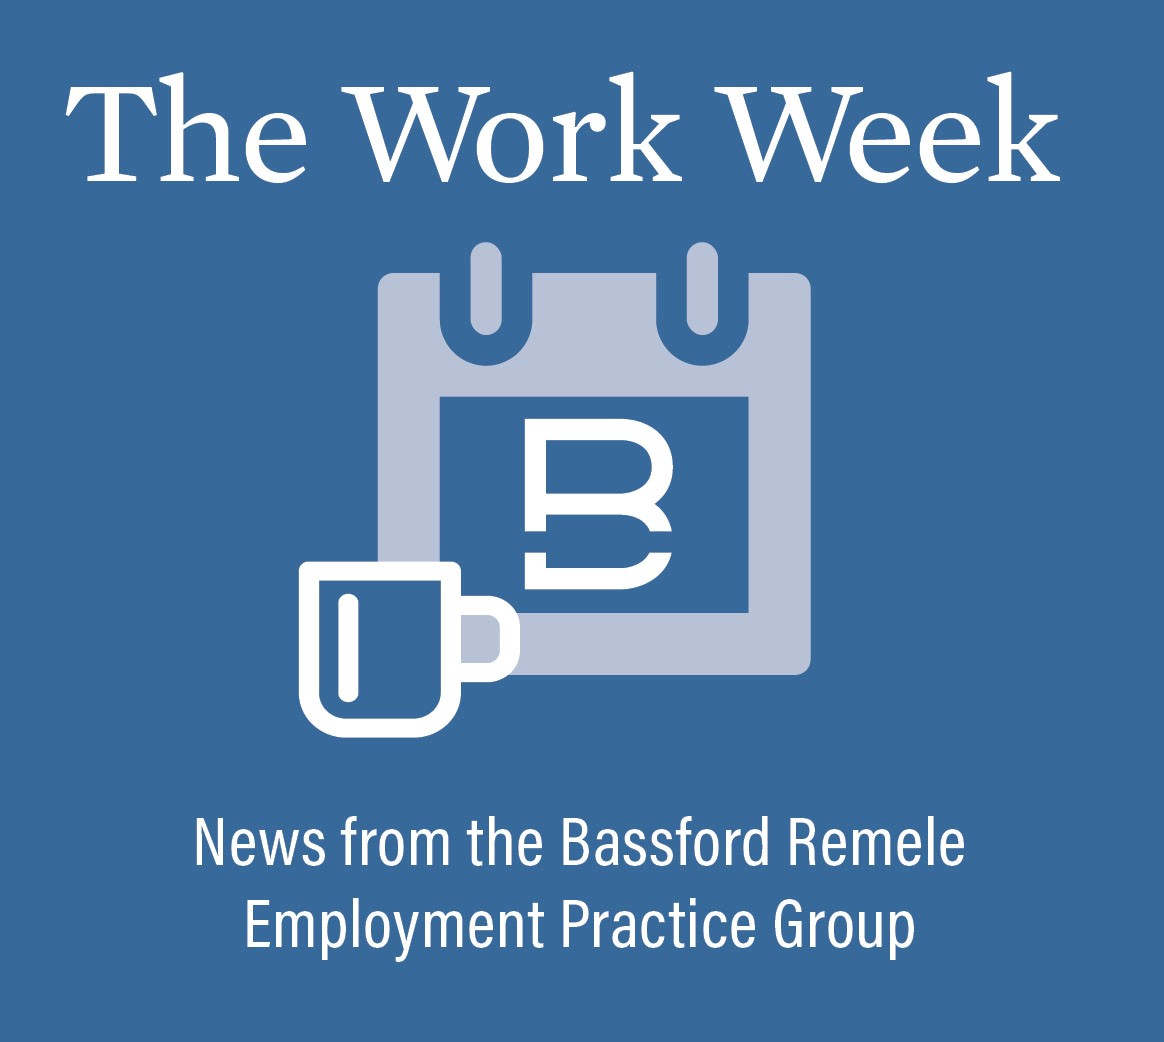 This week we provide a more in-depth review of the most complicated cannabis regulations involving the ability to test applicants and employees under Minnesota’s Drug & Alcohol Testing in the Workplace Act.
bassford.com/uploads/announ…
#employmentlaw #cannabis #DATWA #cannabistesting